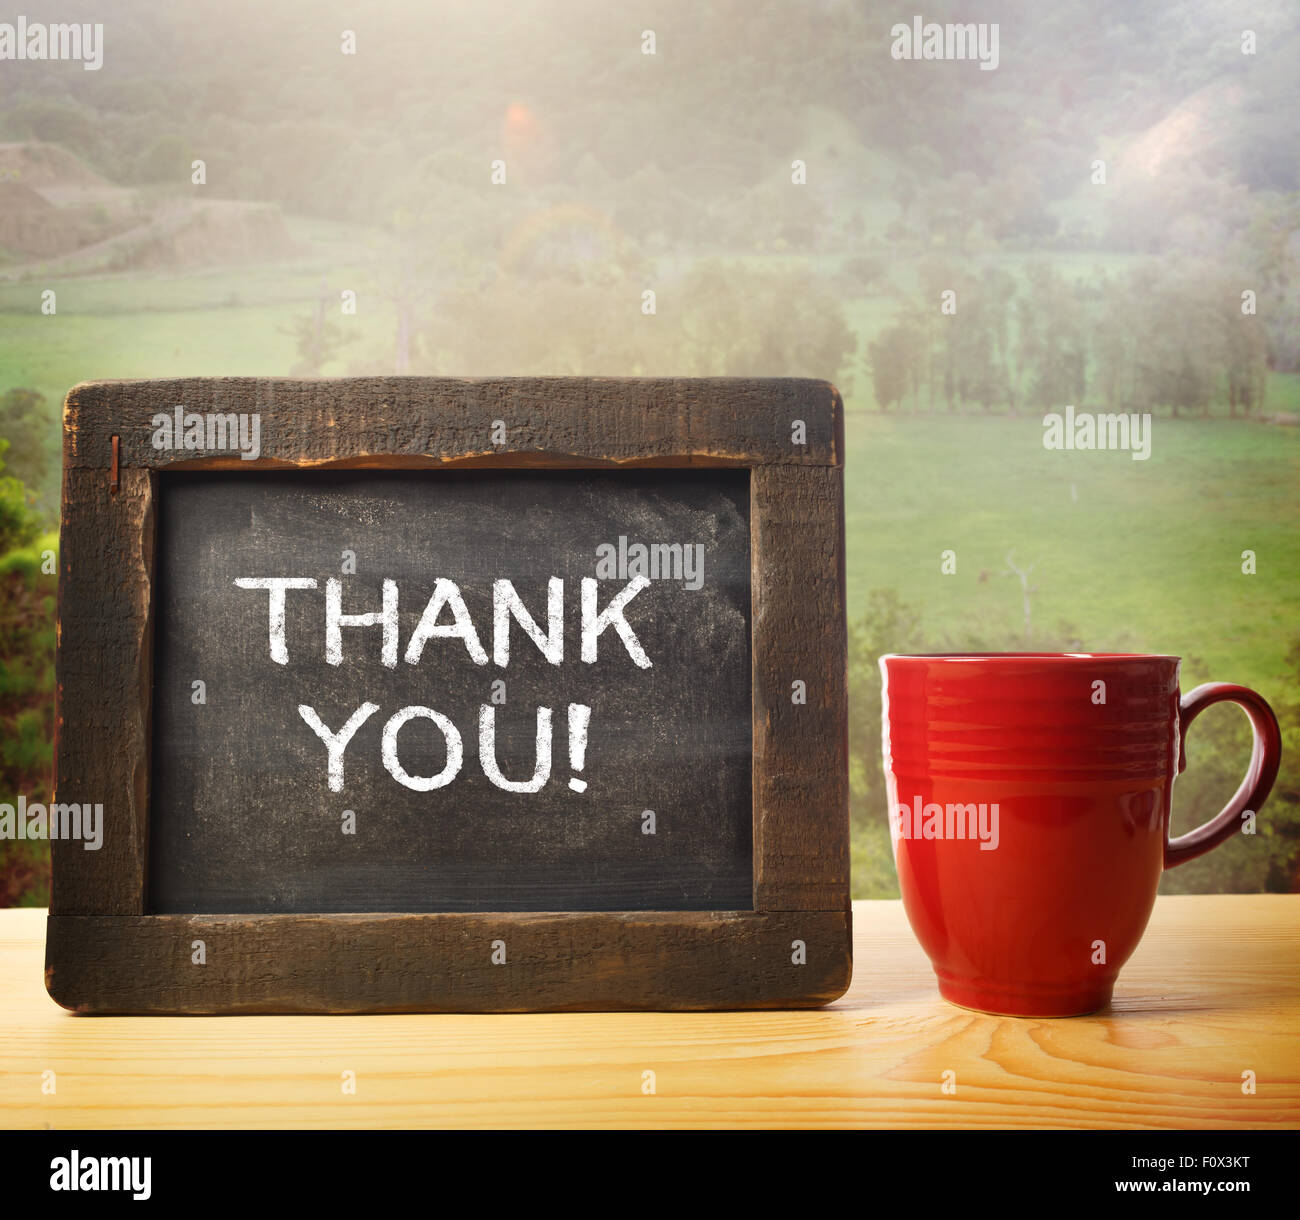 Thank you inscribed on chalkboard in rustic style Stock Photo